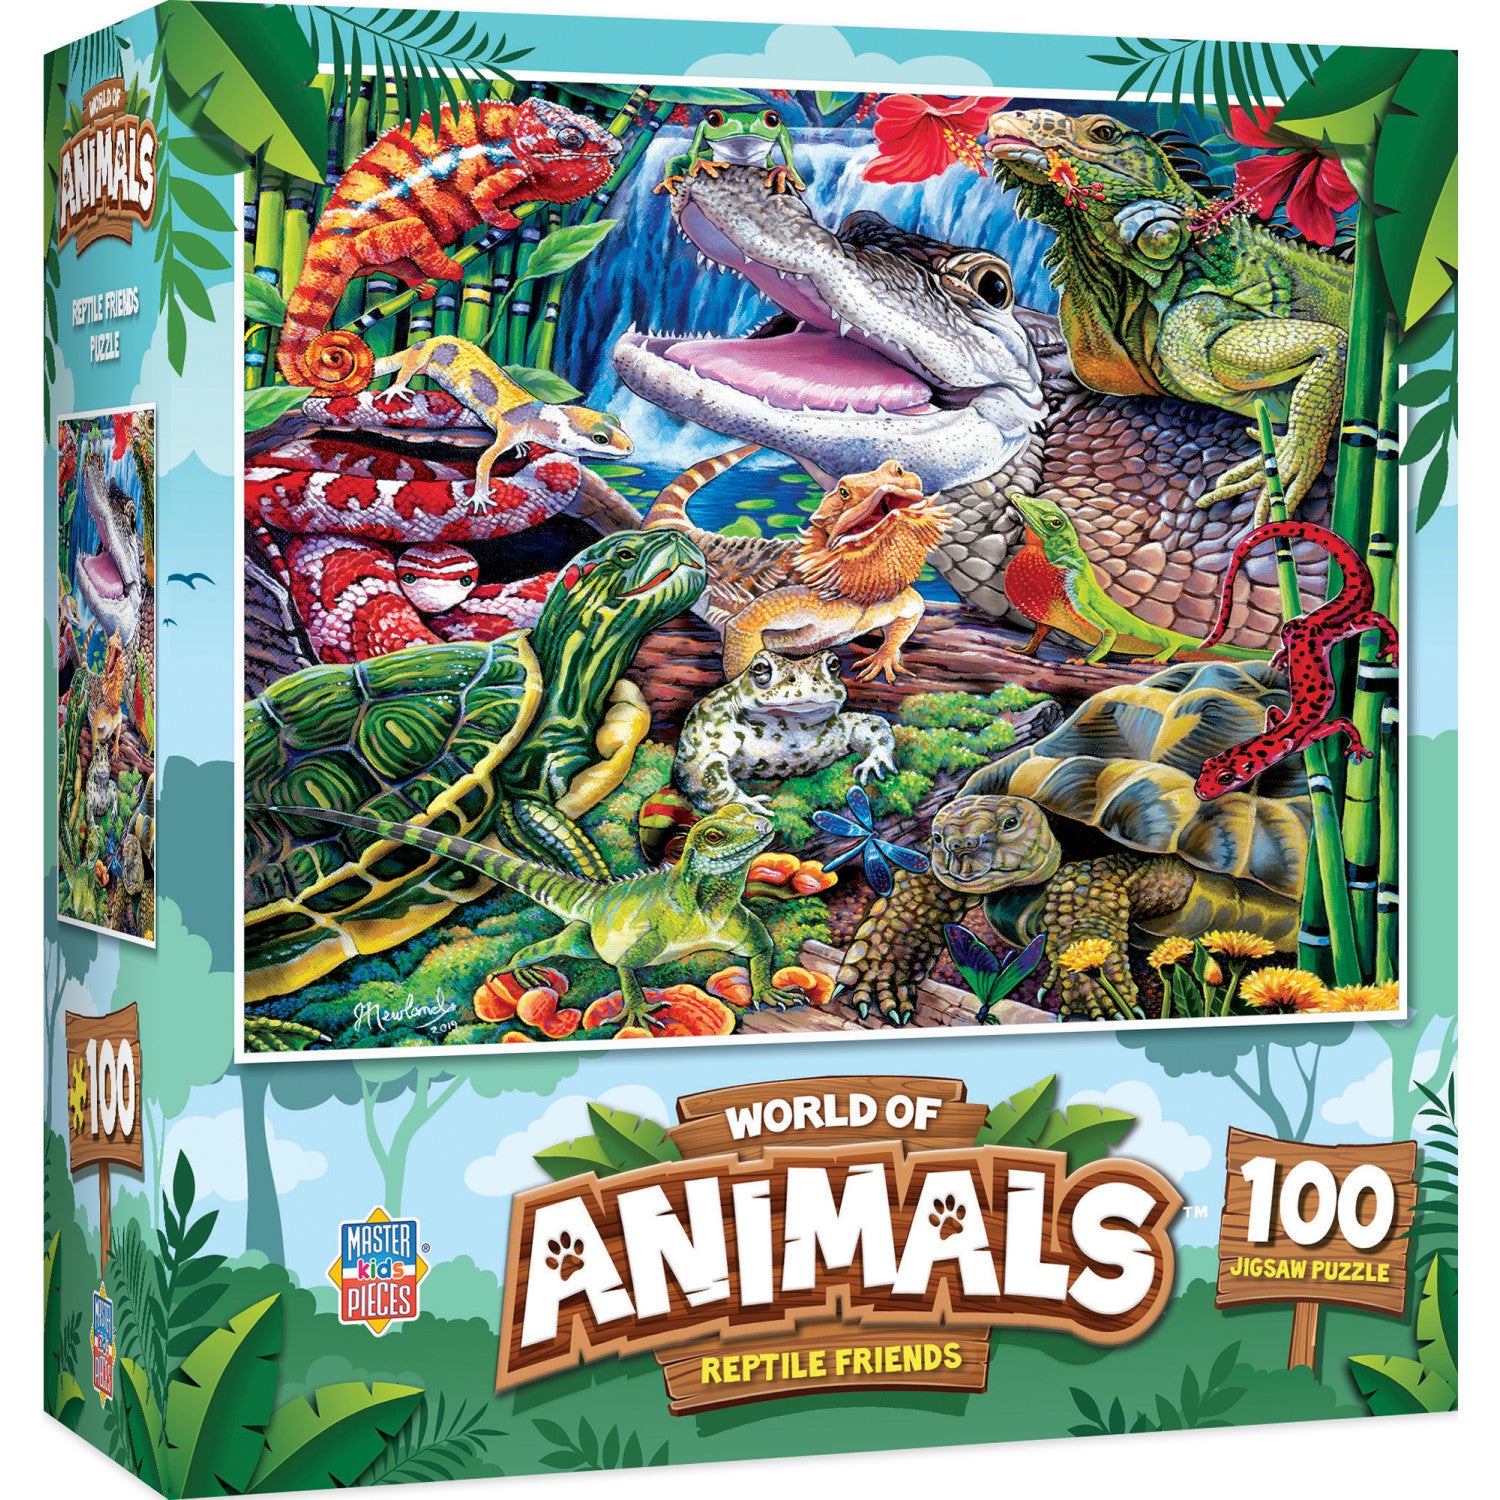 World of Animals - Reptile Friends 100 Piece Jigsaw Puzzle